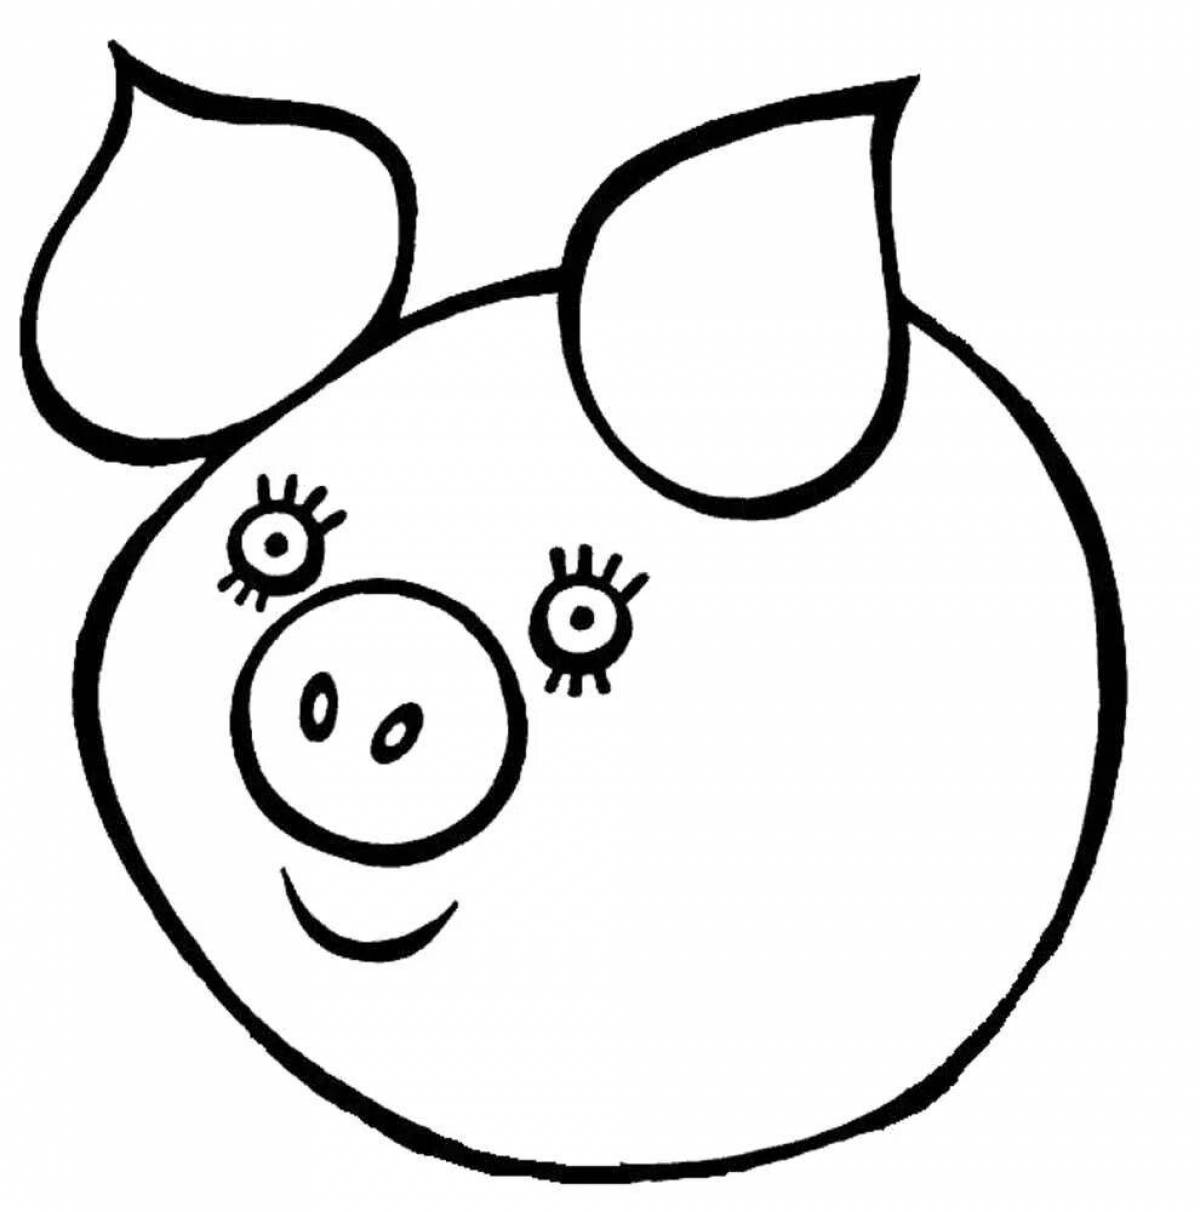 Charming pig coloring book